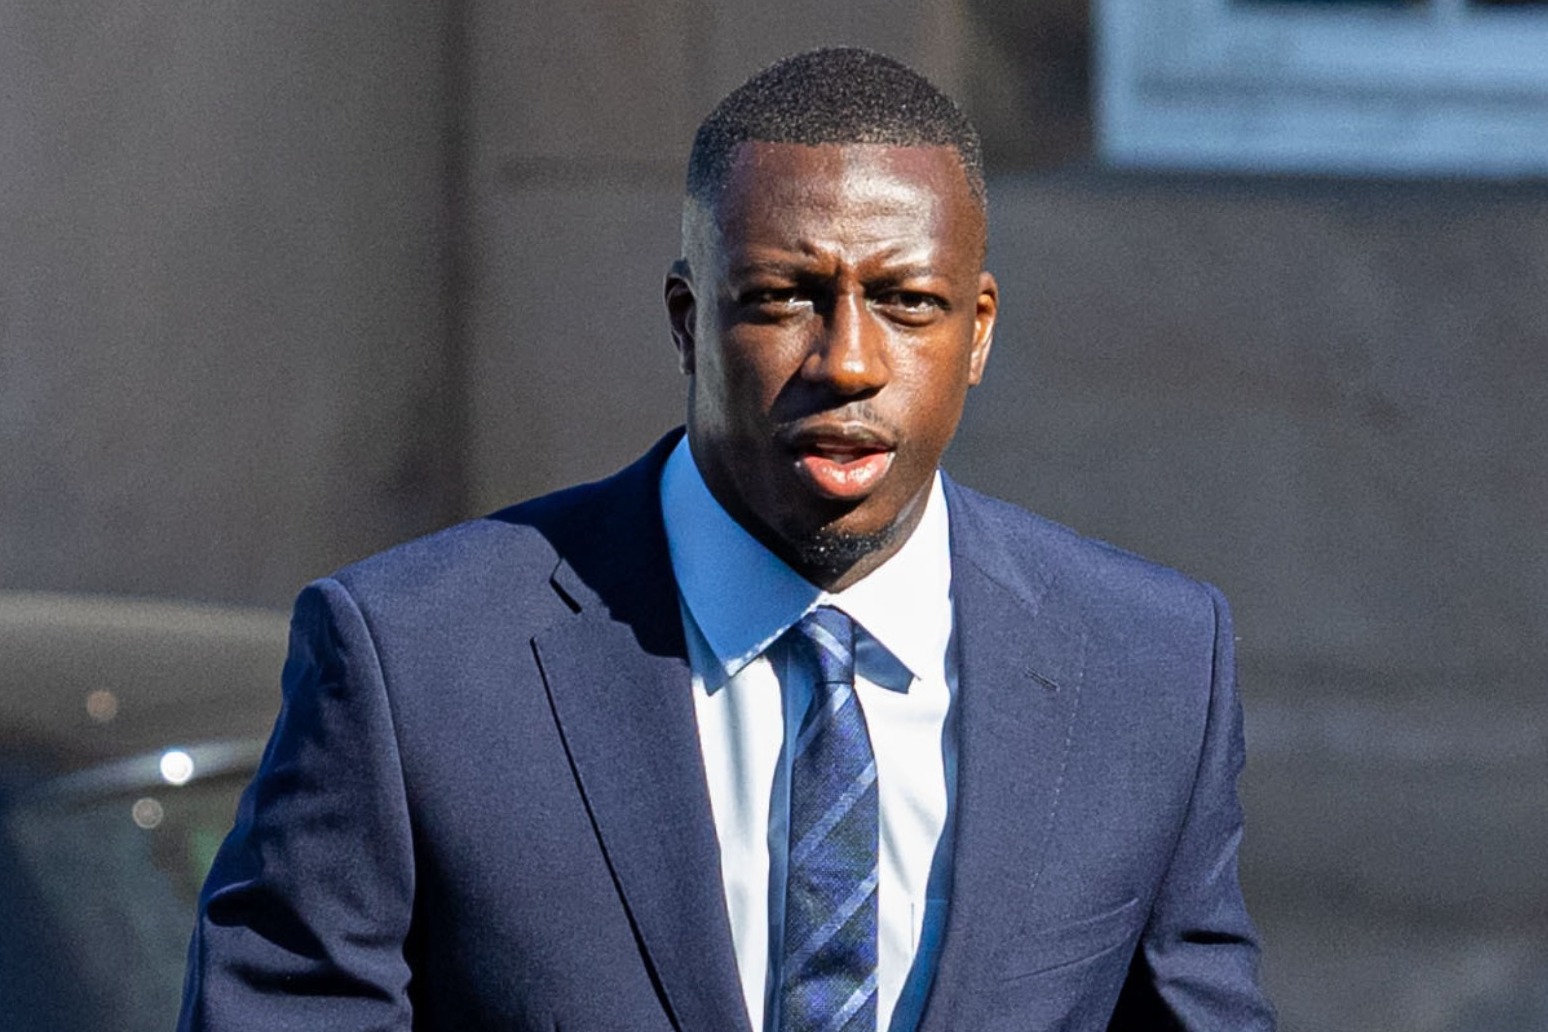 Trial of Manchester City’s Benjamin Mendy on rape charges to begin 